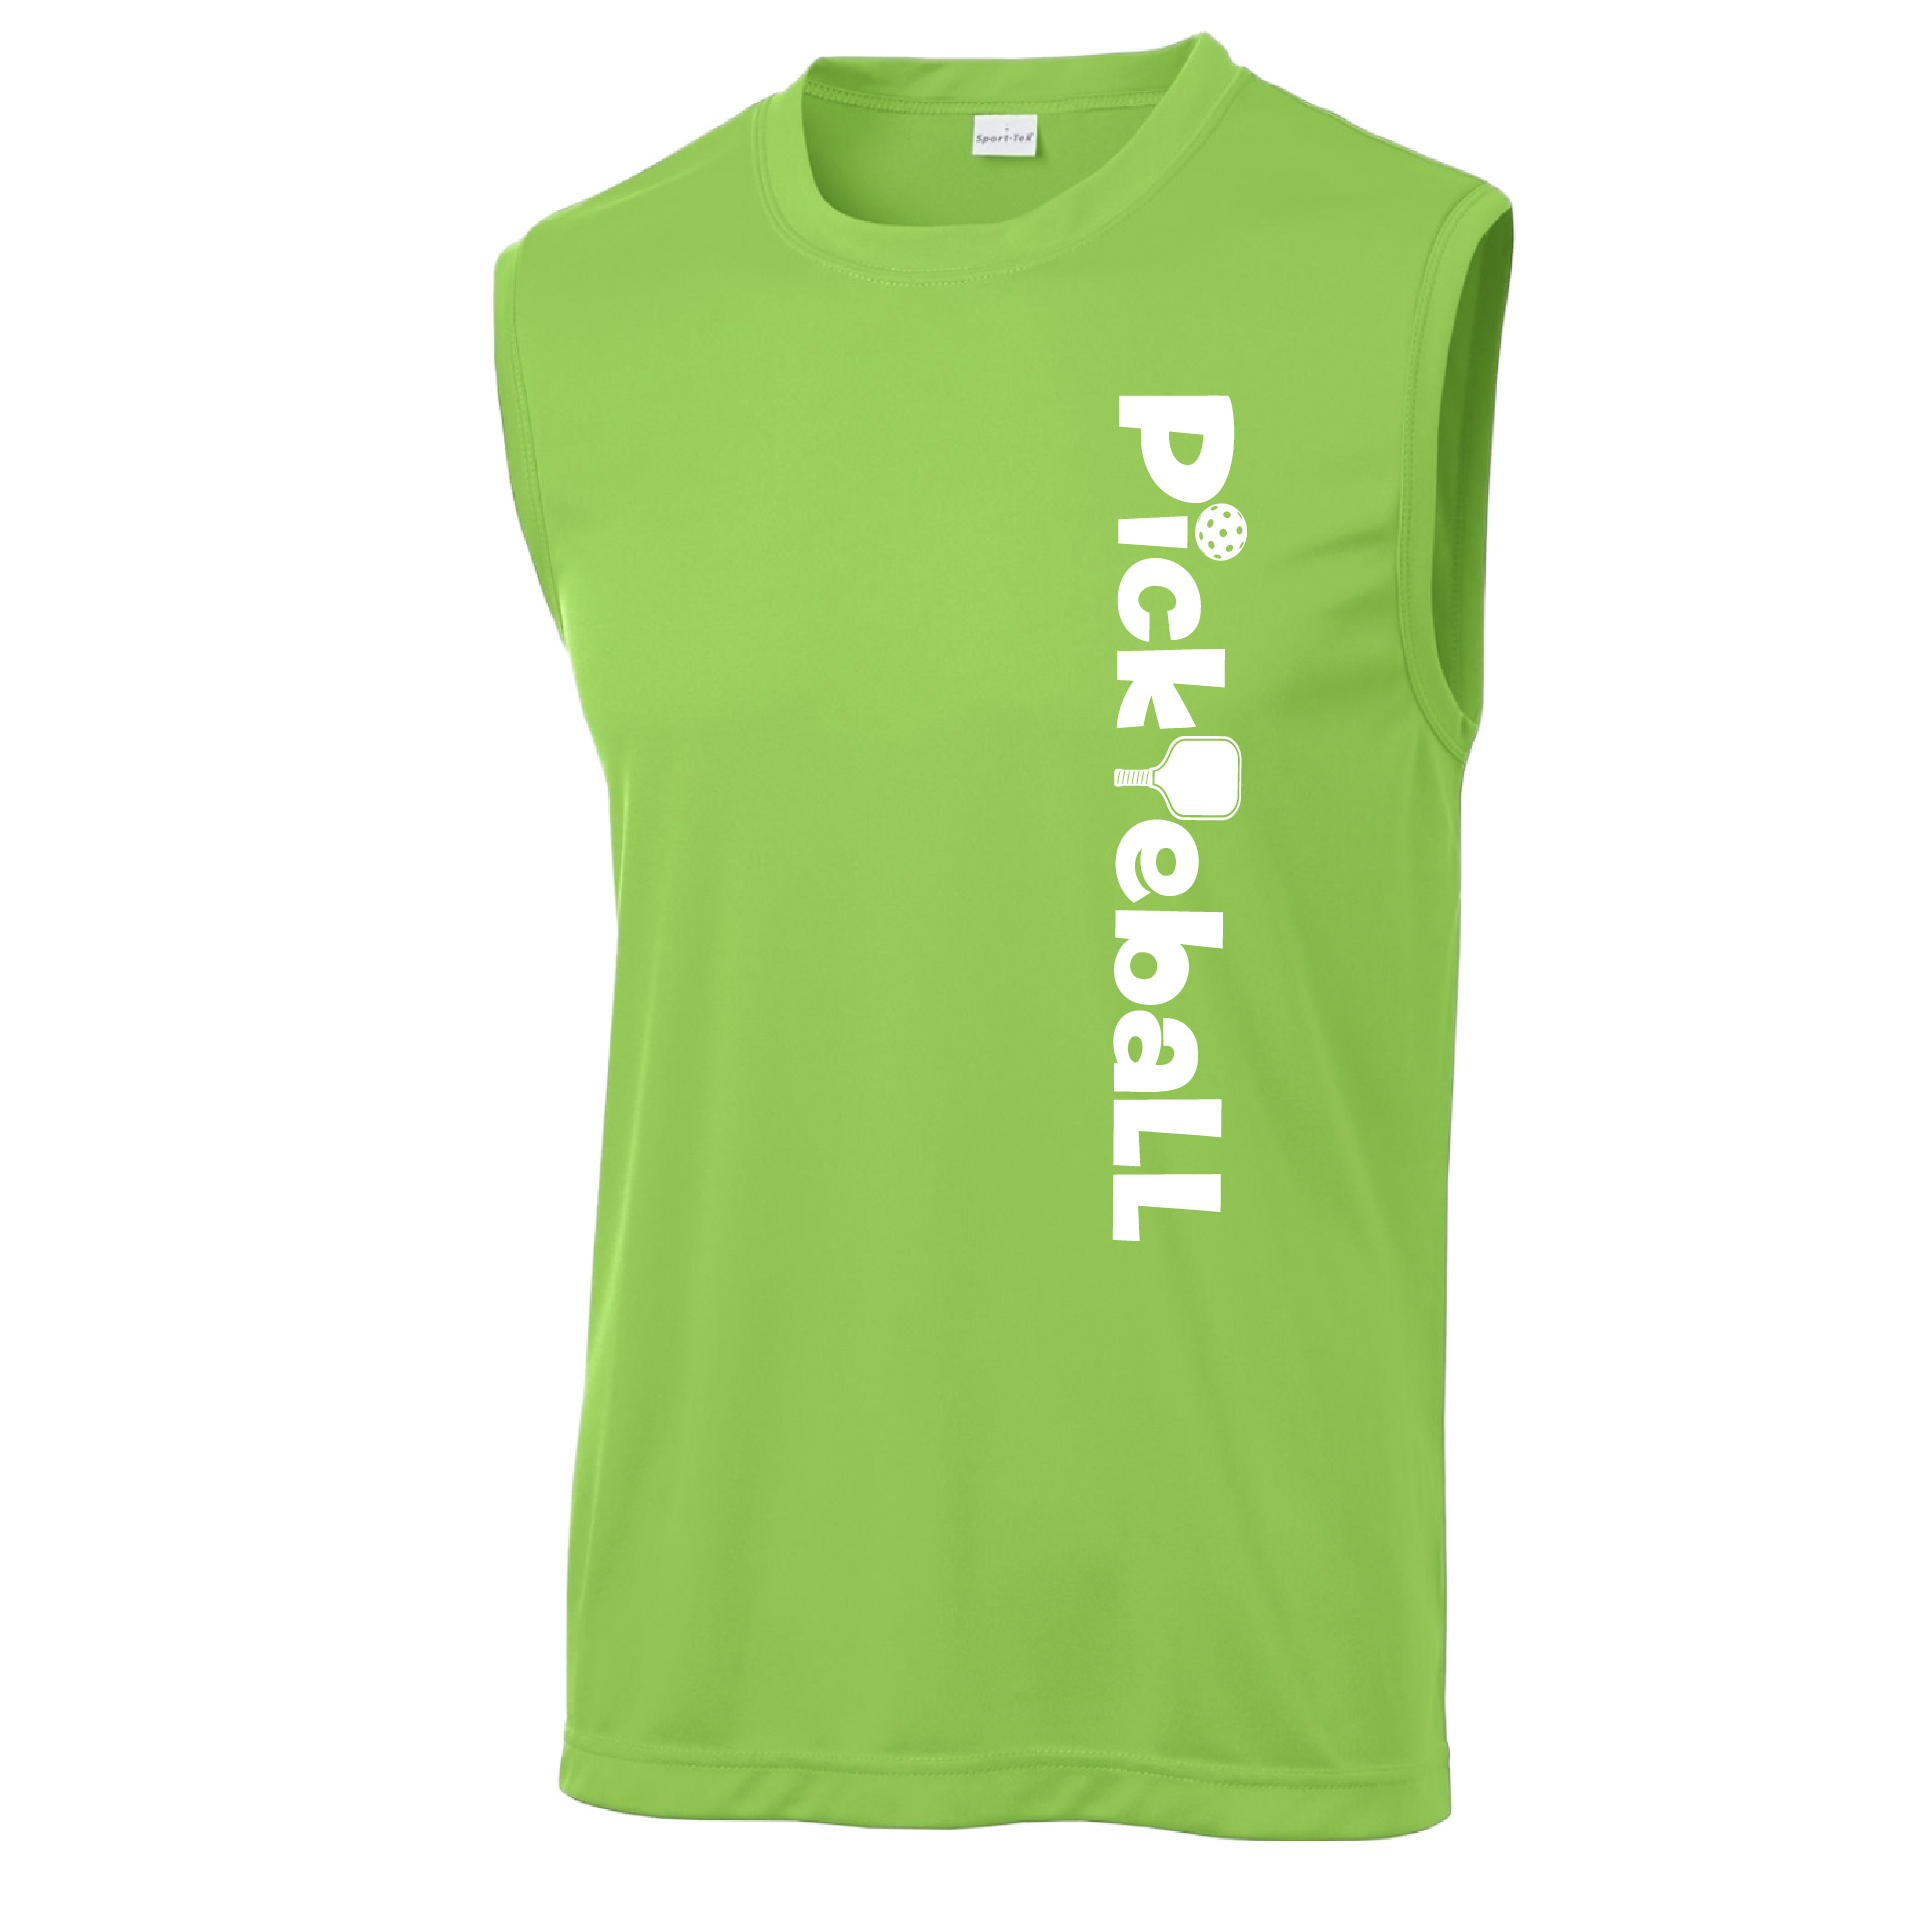 Pickleball Design: Pickleball Horizontal Customizable Location  Men's Style: Sleeveless  Shirts are lightweight, roomy and highly breathable. These moisture-wicking shirts are designed for athletic performance. They feature PosiCharge technology to lock in color and prevent logos from fading. Removable tag and set-in sleeves for comfort. 